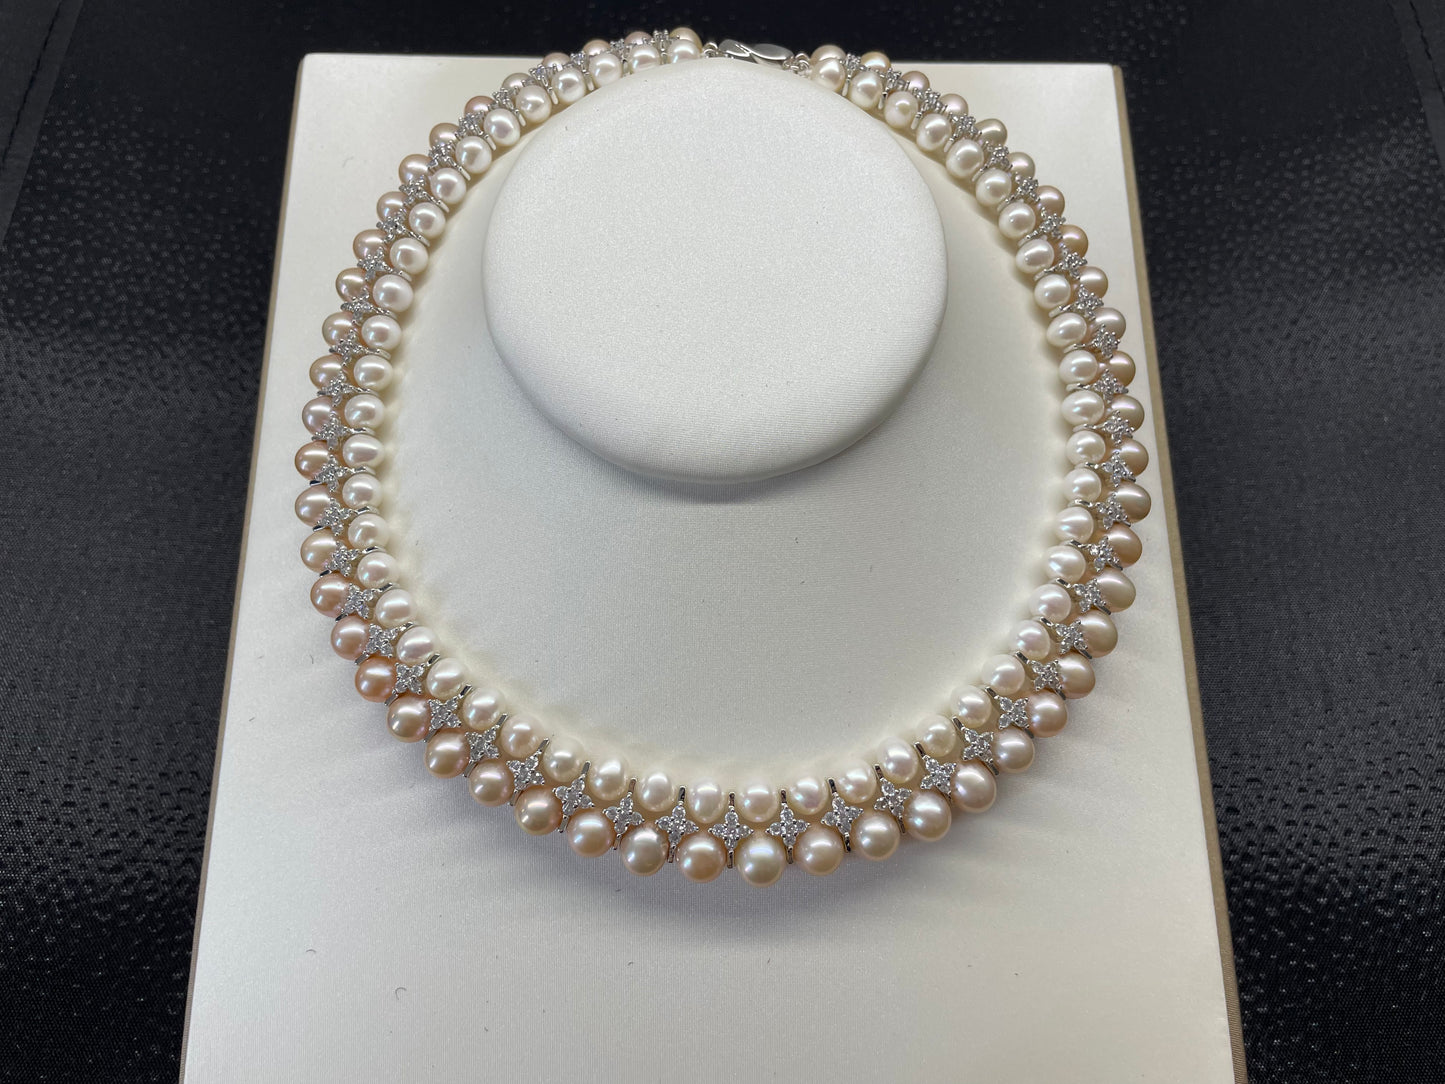 (N1) Pearl necklace (Fashion style) $275